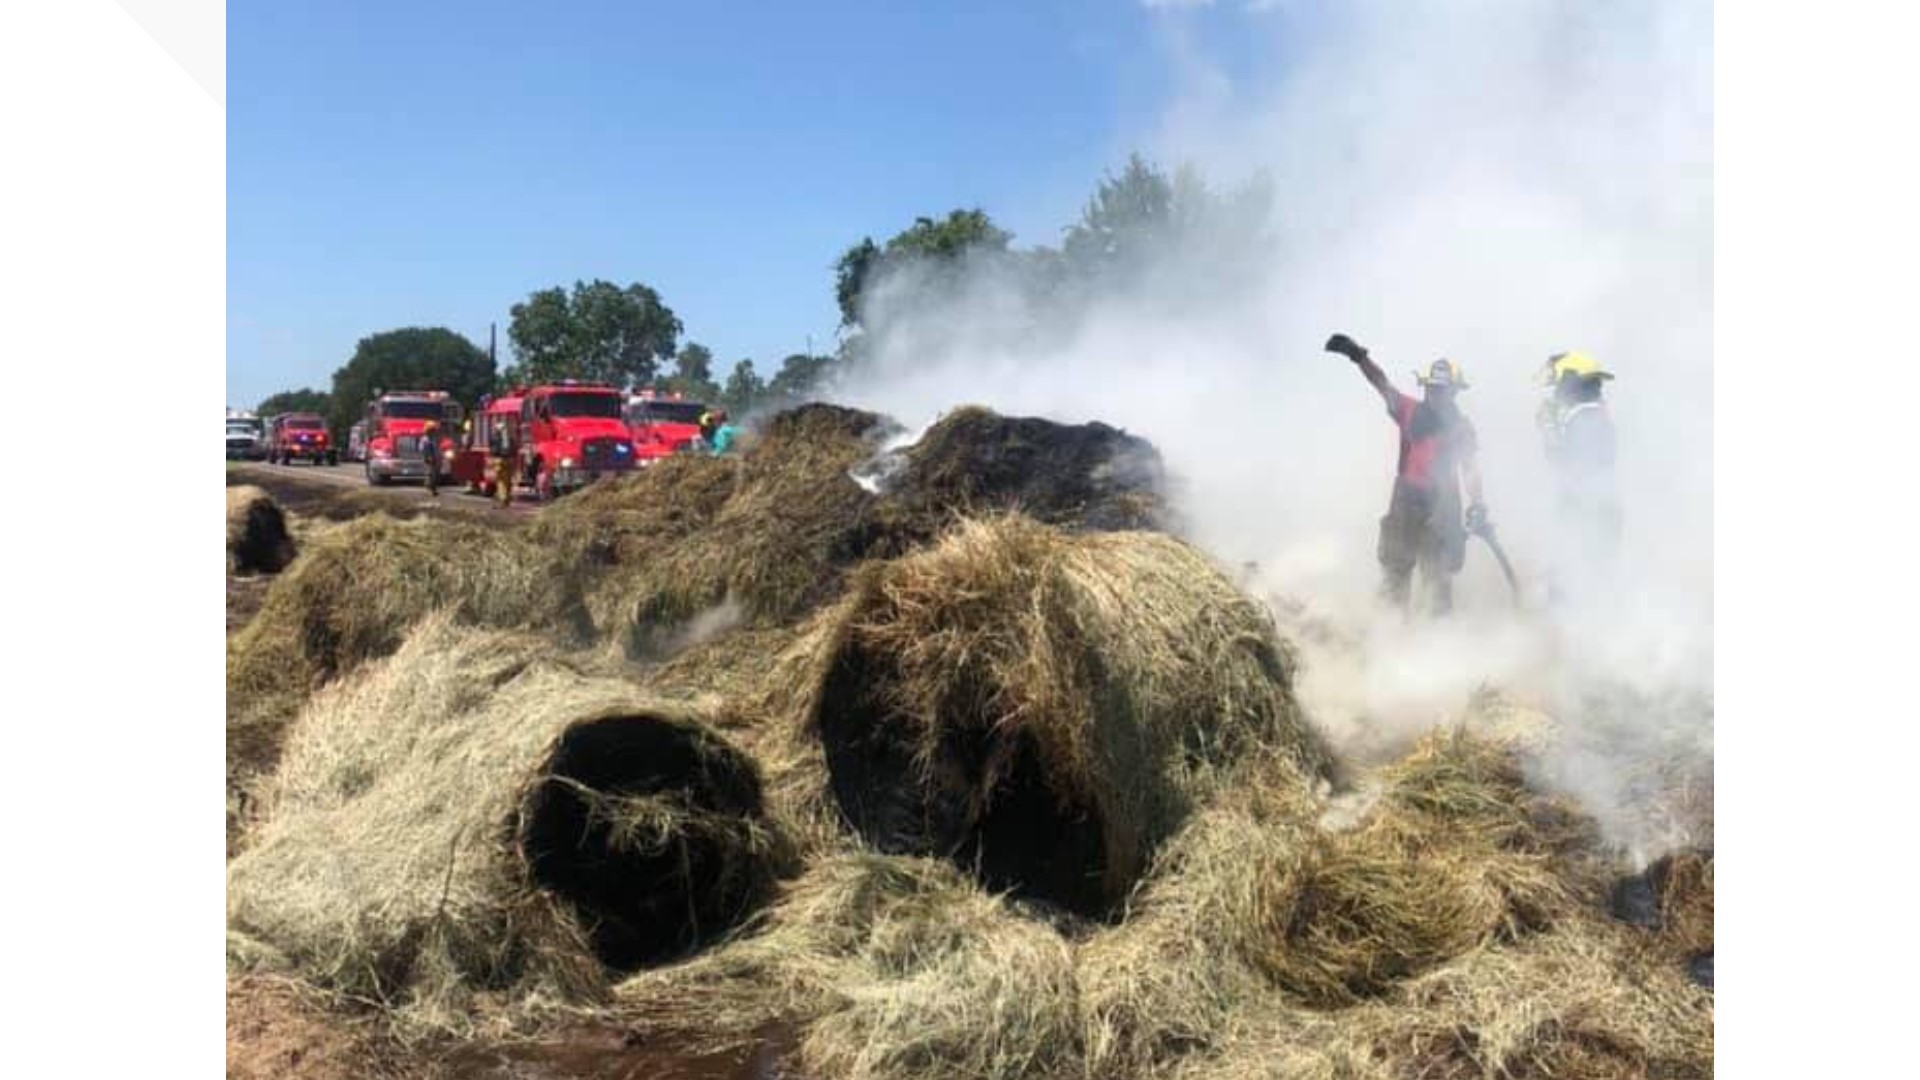 It took three fire crews three hours to put out a hay fire that stretched the entire length of a 40-foot gooseneck trailer.